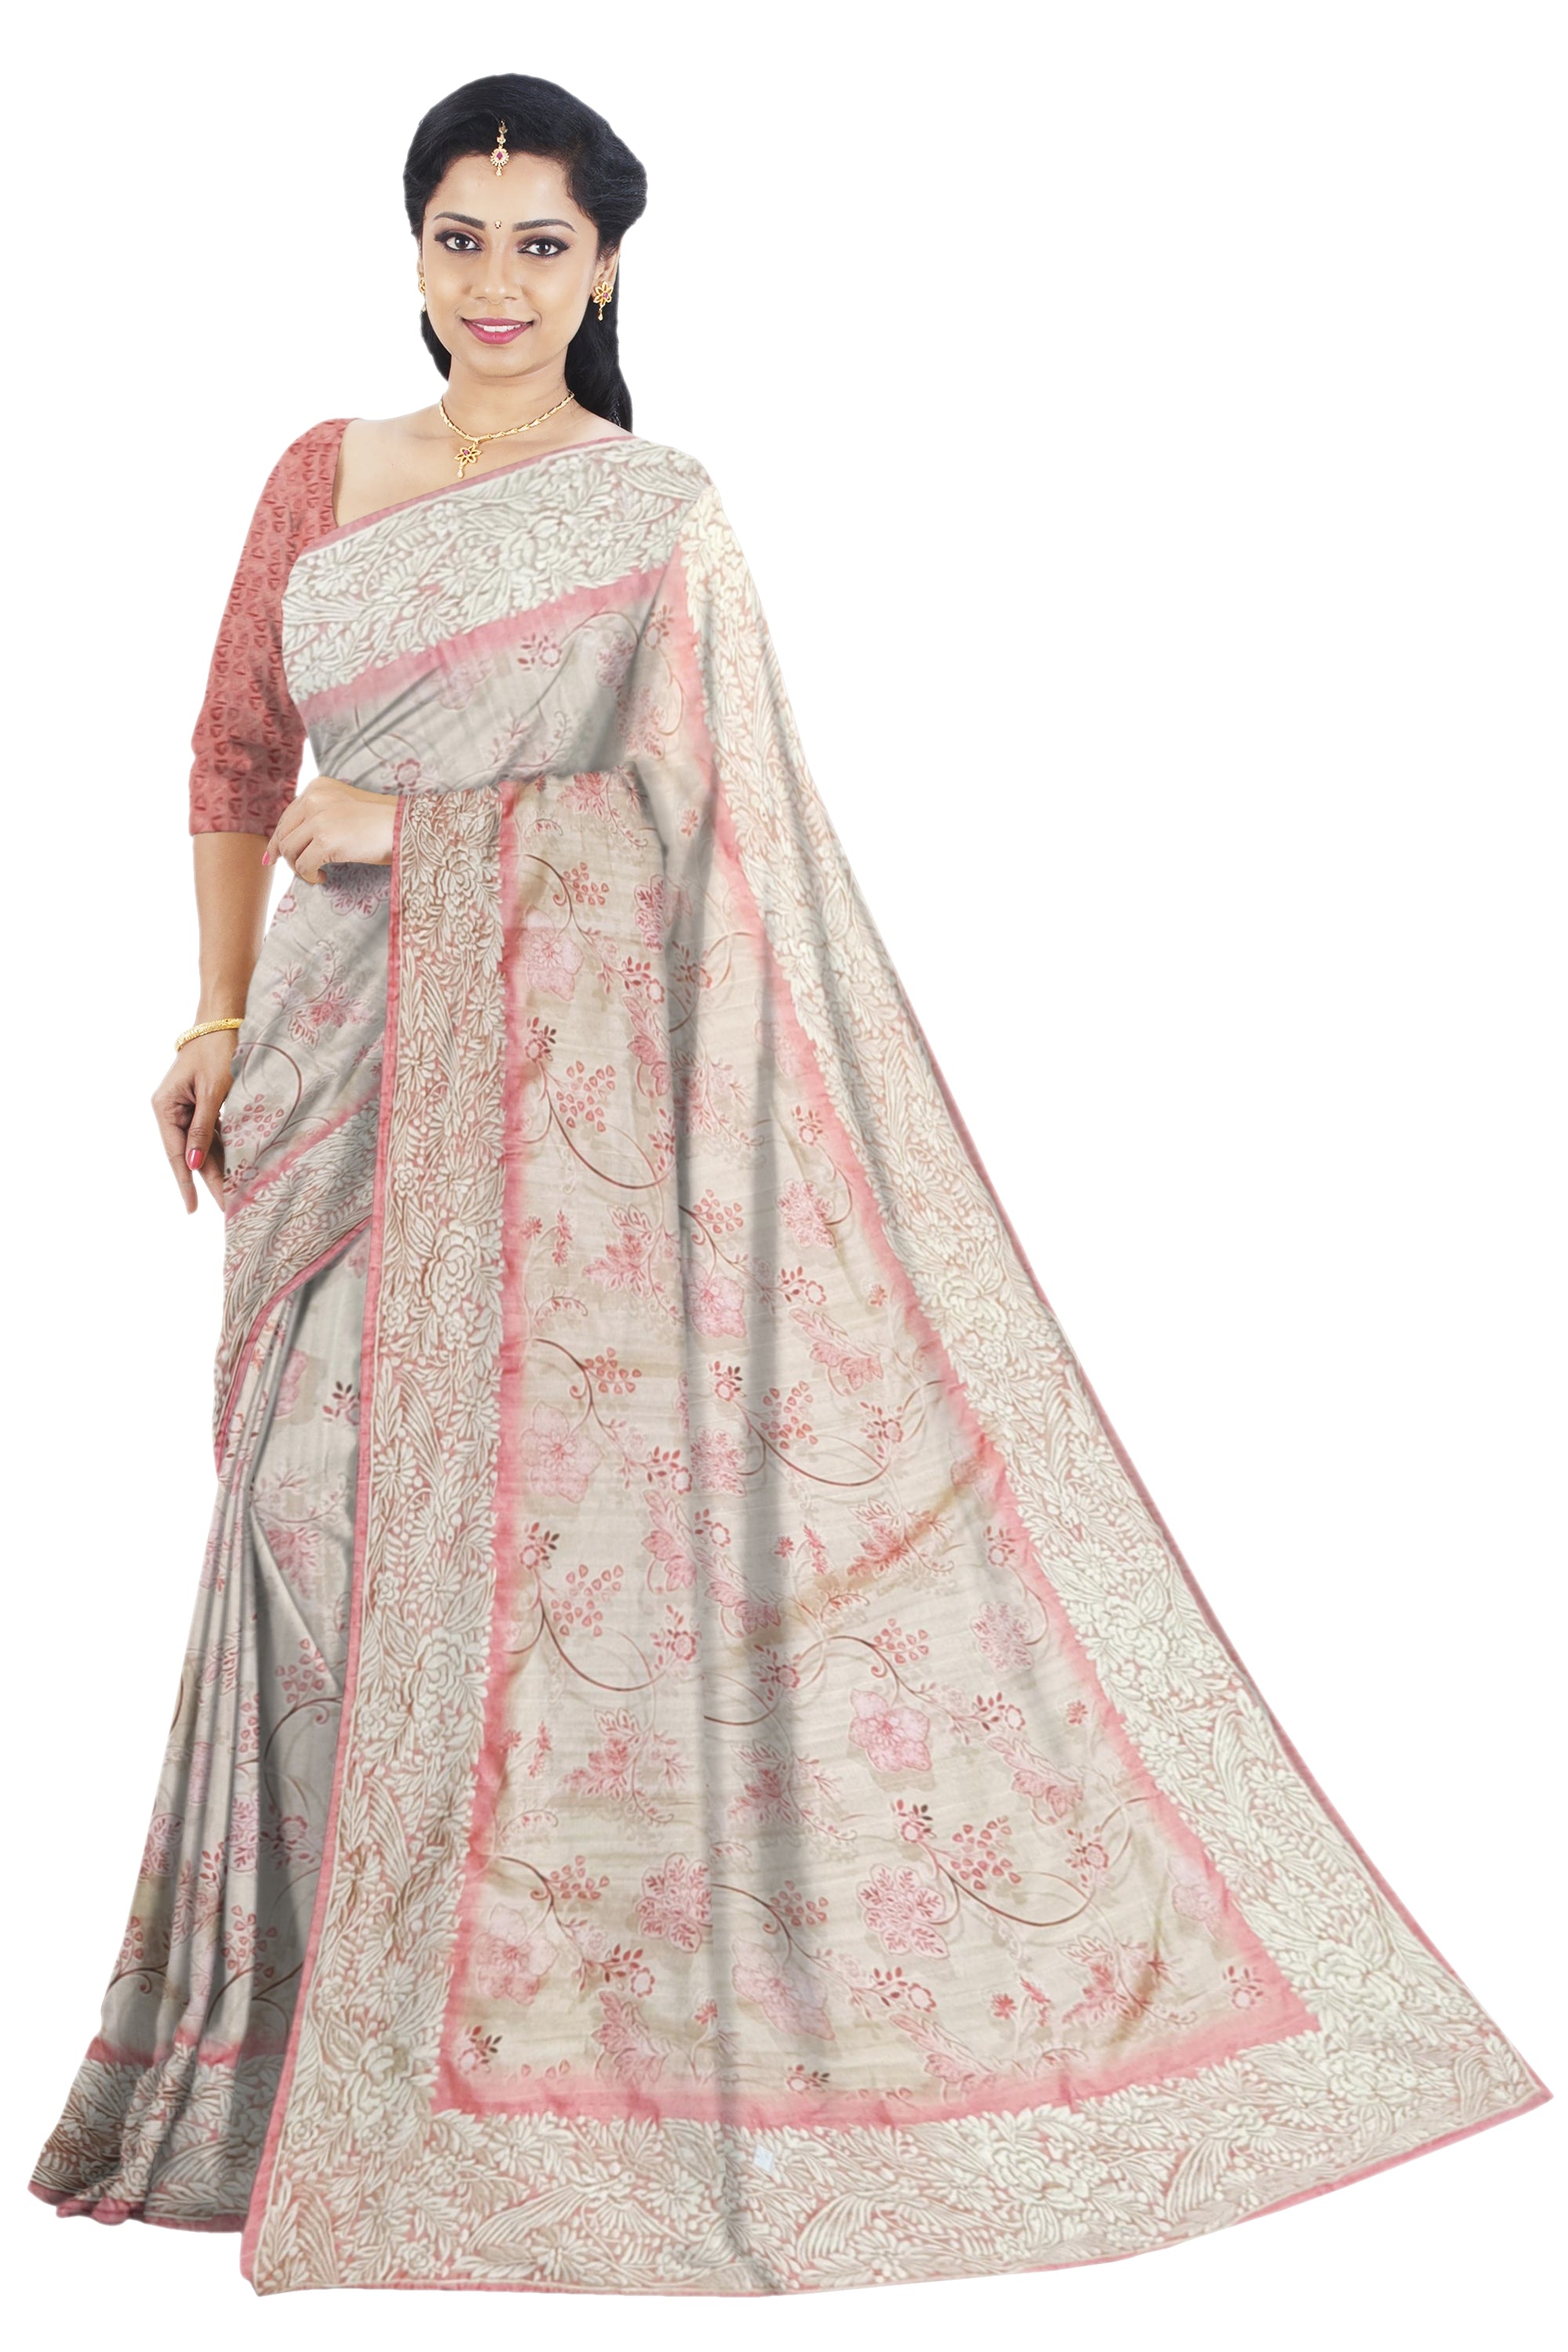 Off white Tussar Cut Work Saree with Pink Flowers